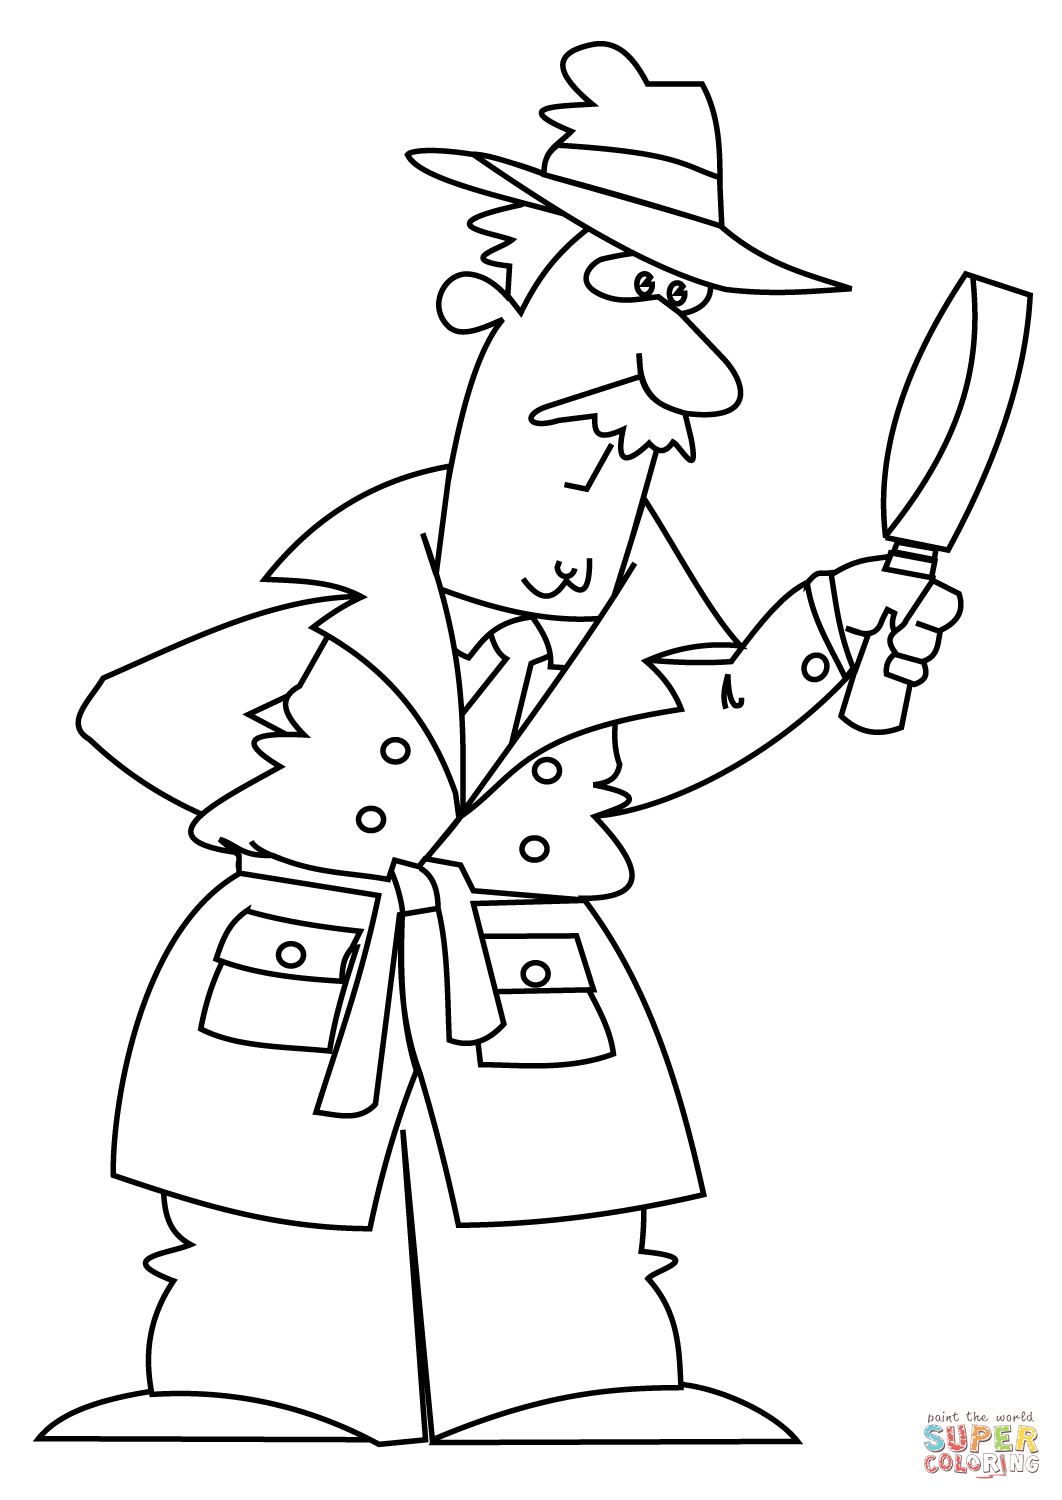 detective coloring pages free